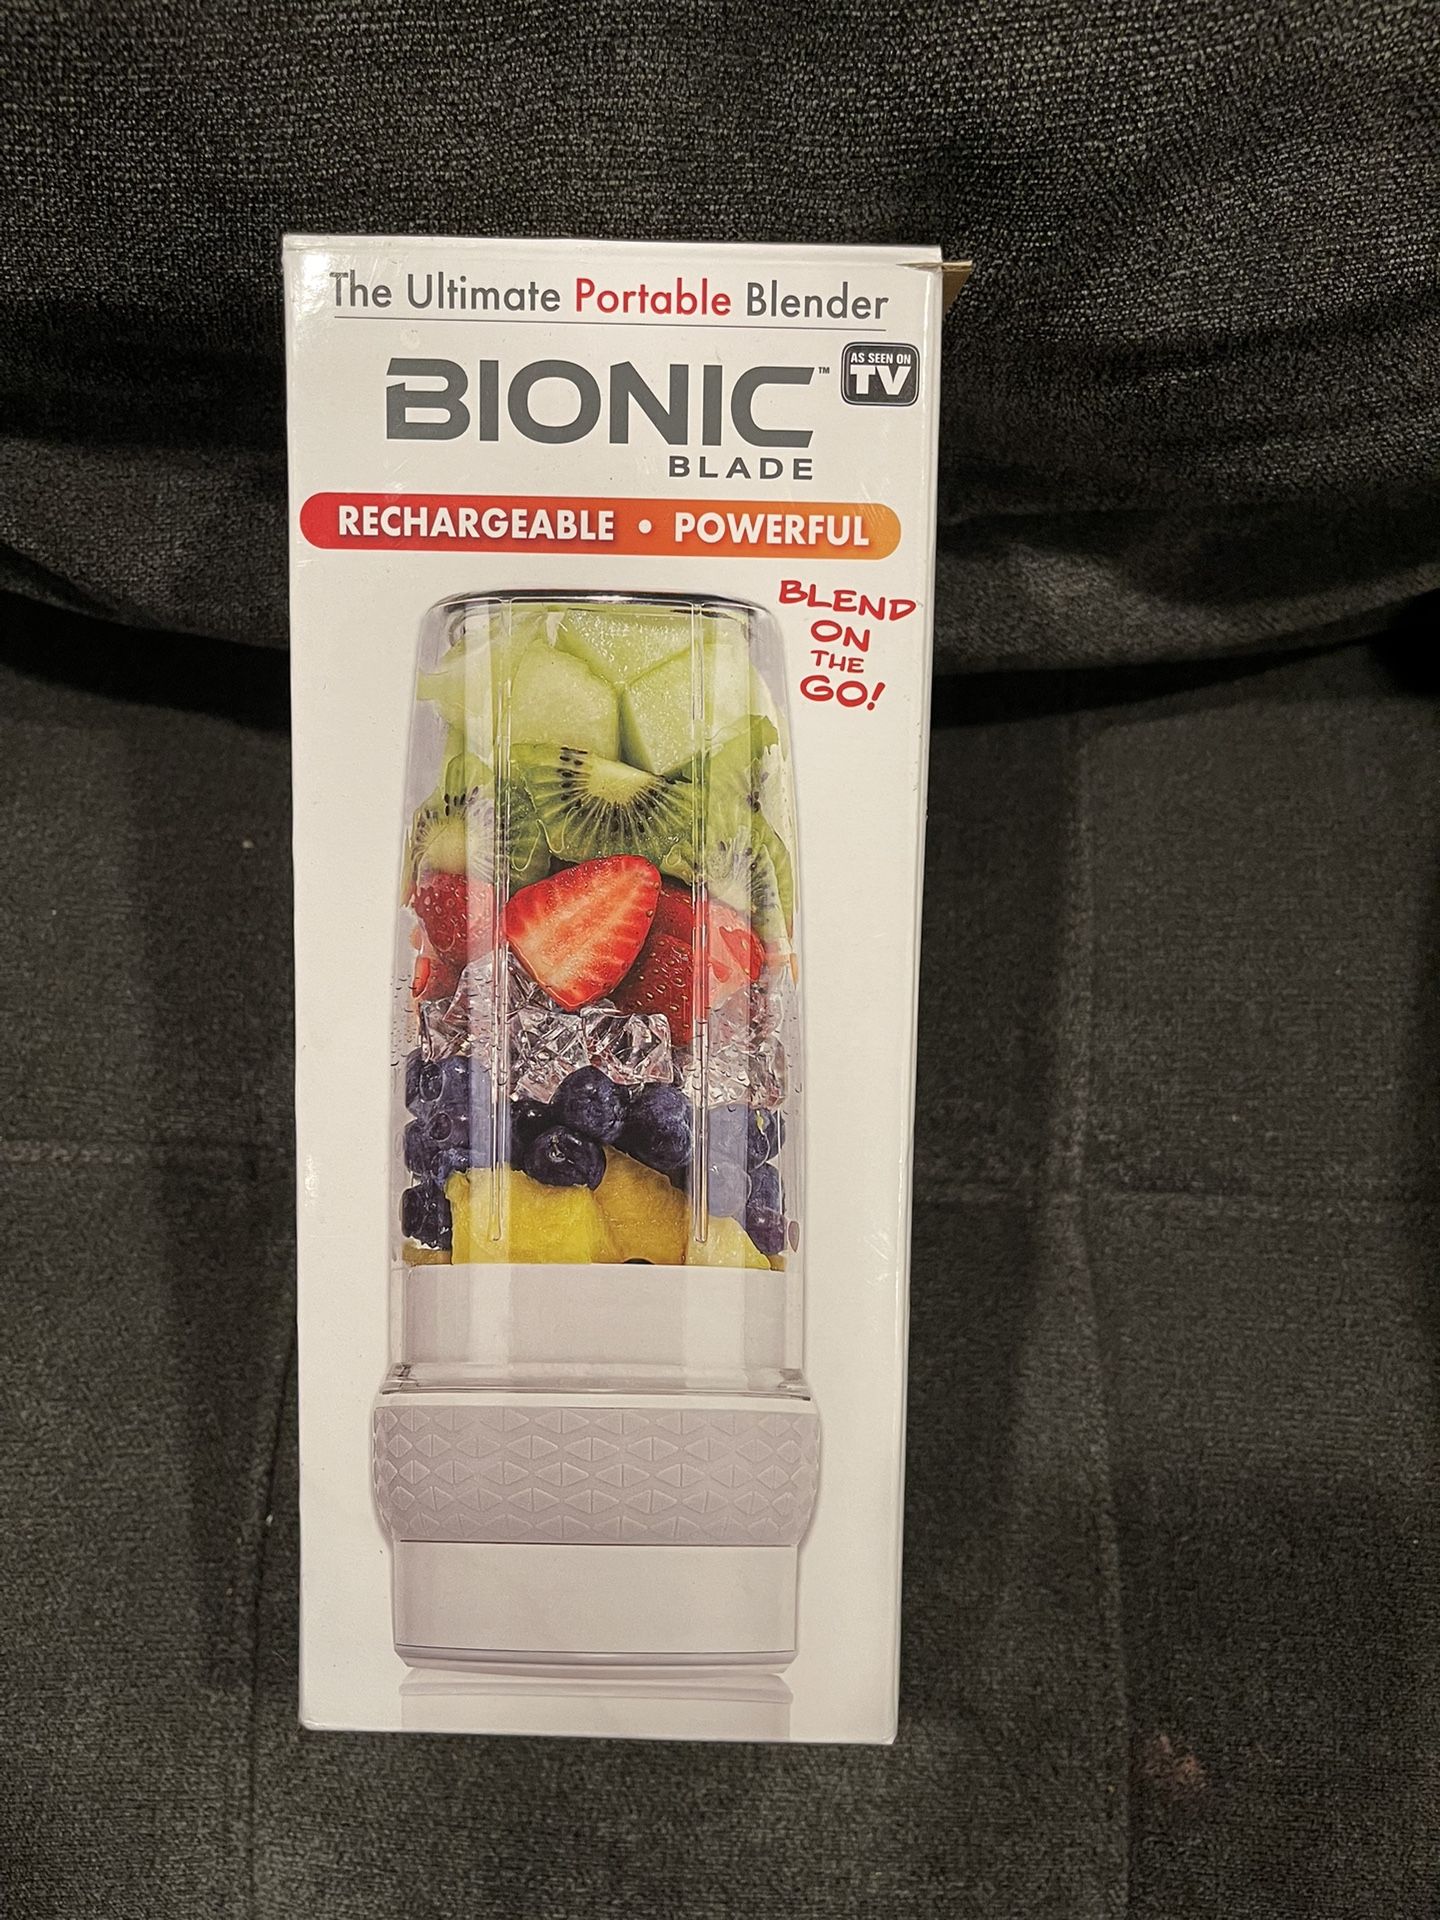  Bionic Blade Personal-Sized Blender 26 oz., BPA-Free, Cordless,  Rechargeable 18,000 RPM Portable Blender for Shakes and Smoothies Mini  Blender Portable 8.6 Tall, Seen On TV: Home & Kitchen